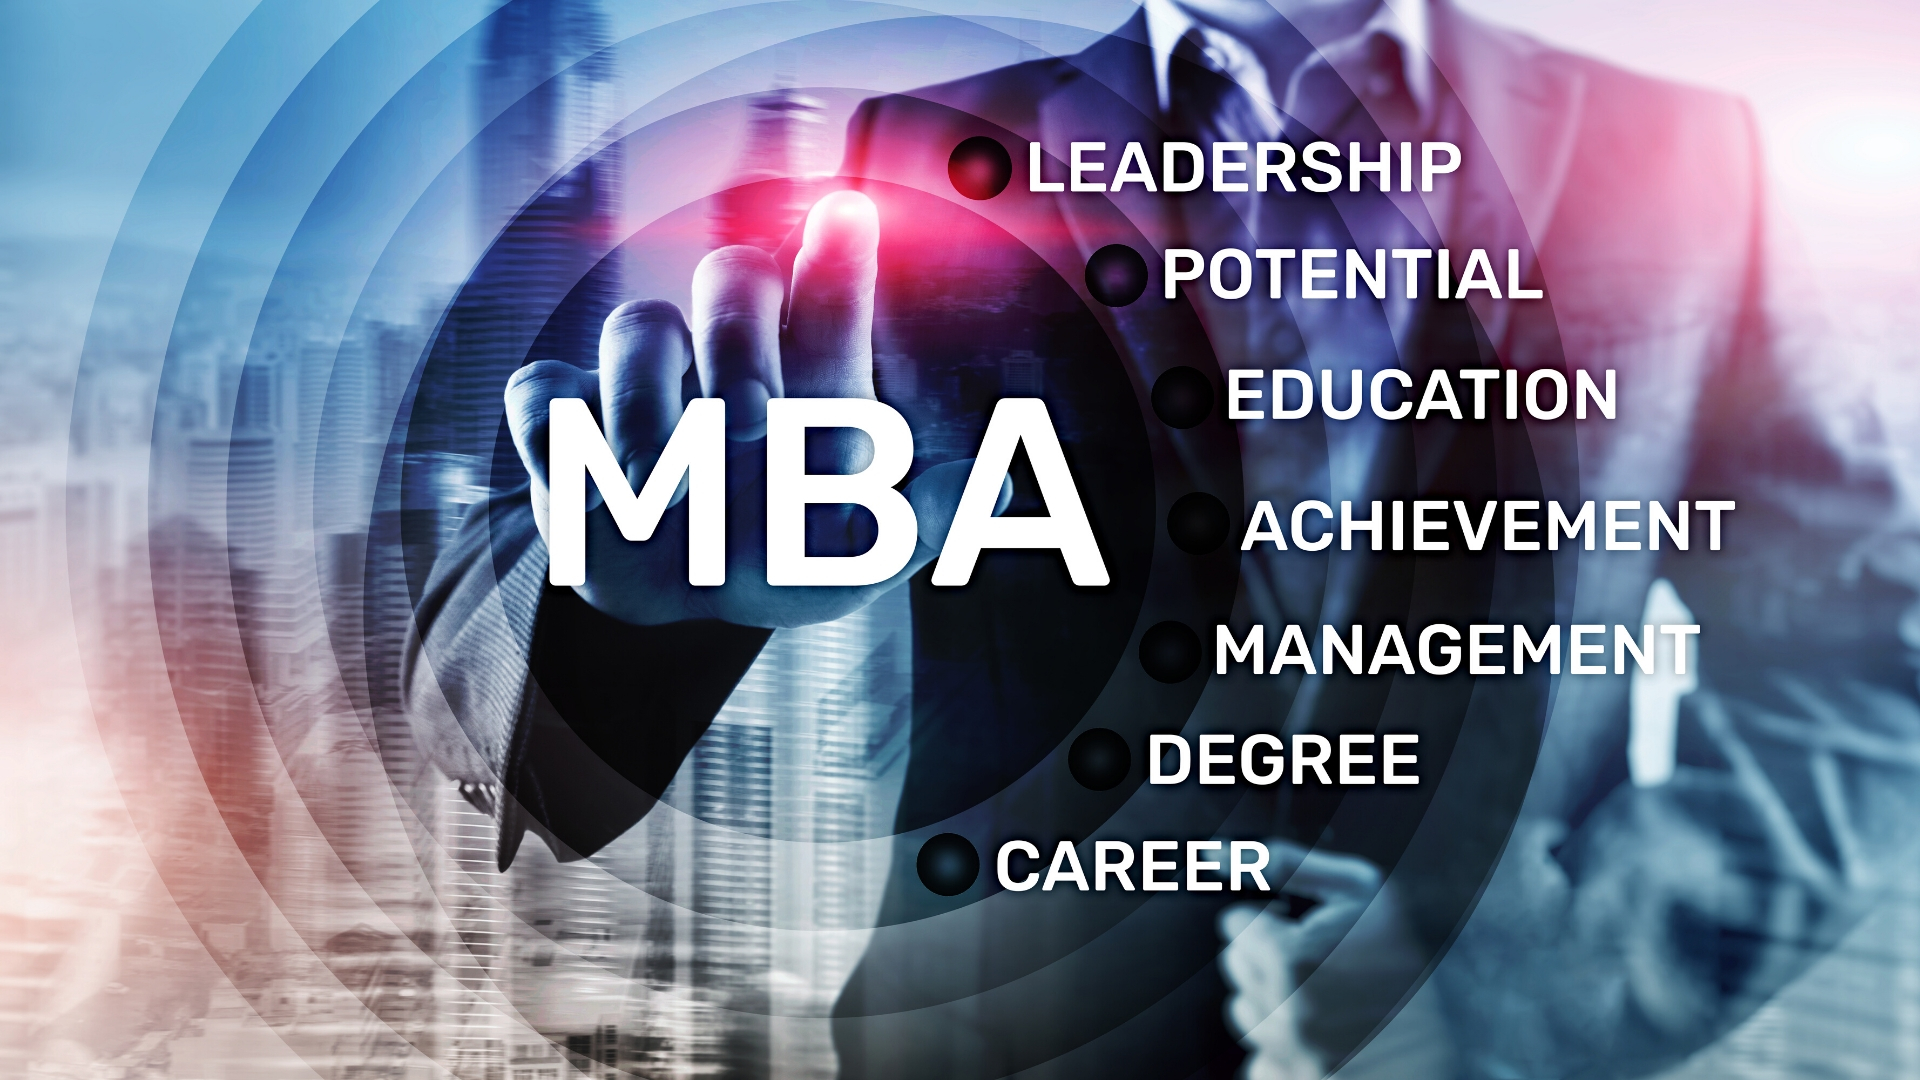 Chapter Wise MBA Notes Study Material Pdf Download